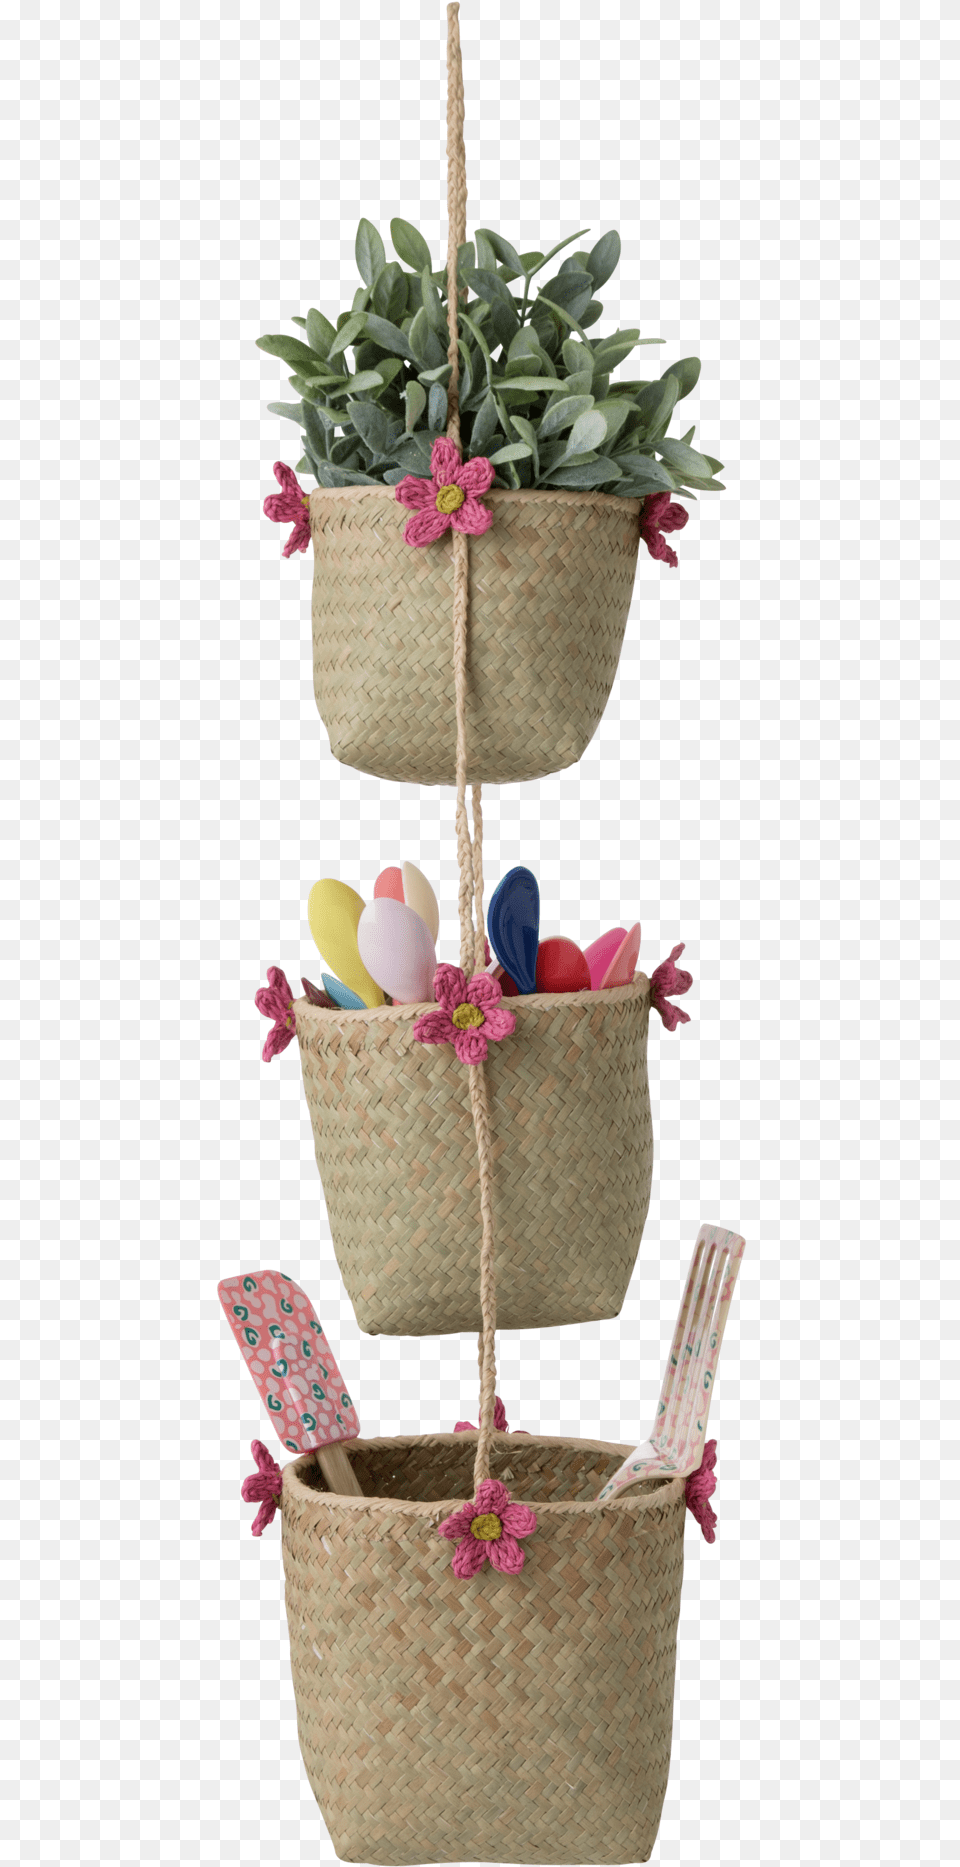 Seagrass Hanging Storage Baskets With Pink Crochet Basket, Plant, Potted Plant, Jar, Planter Free Png Download